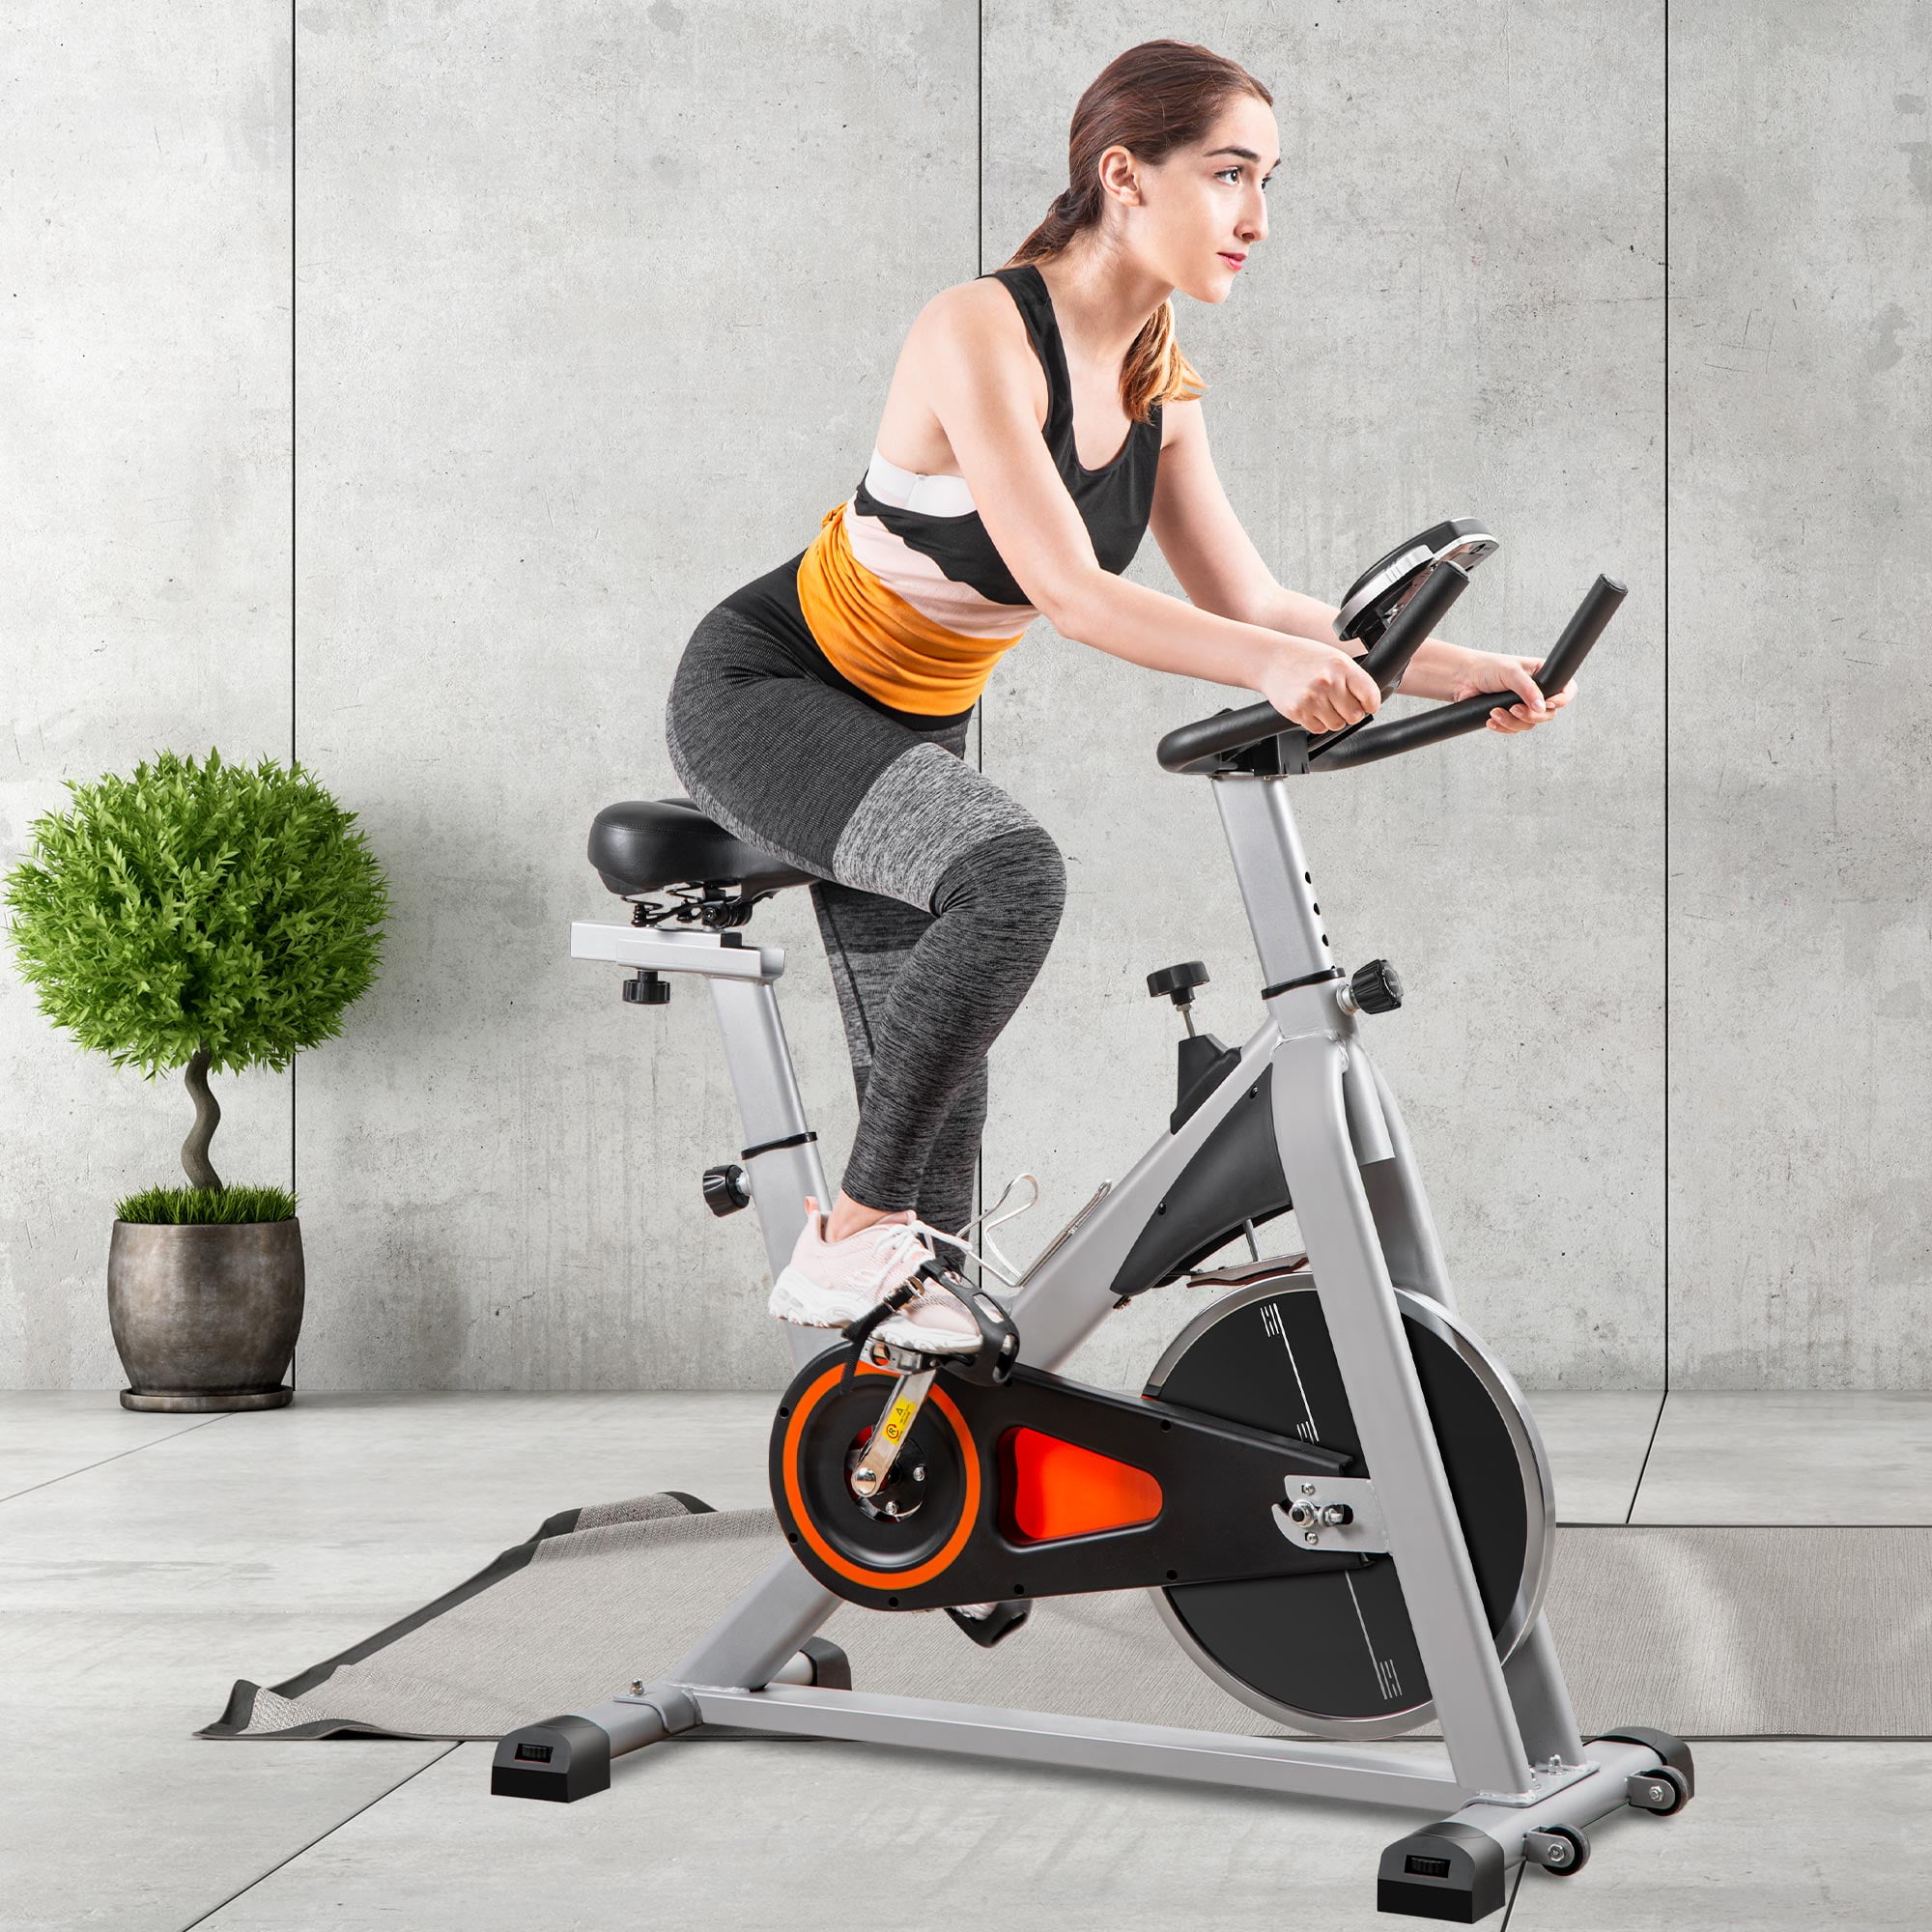 Details about   Indoor Pro Stationary Exercise Bike Bicycle Cycling Cardio Workout Fitness Home 